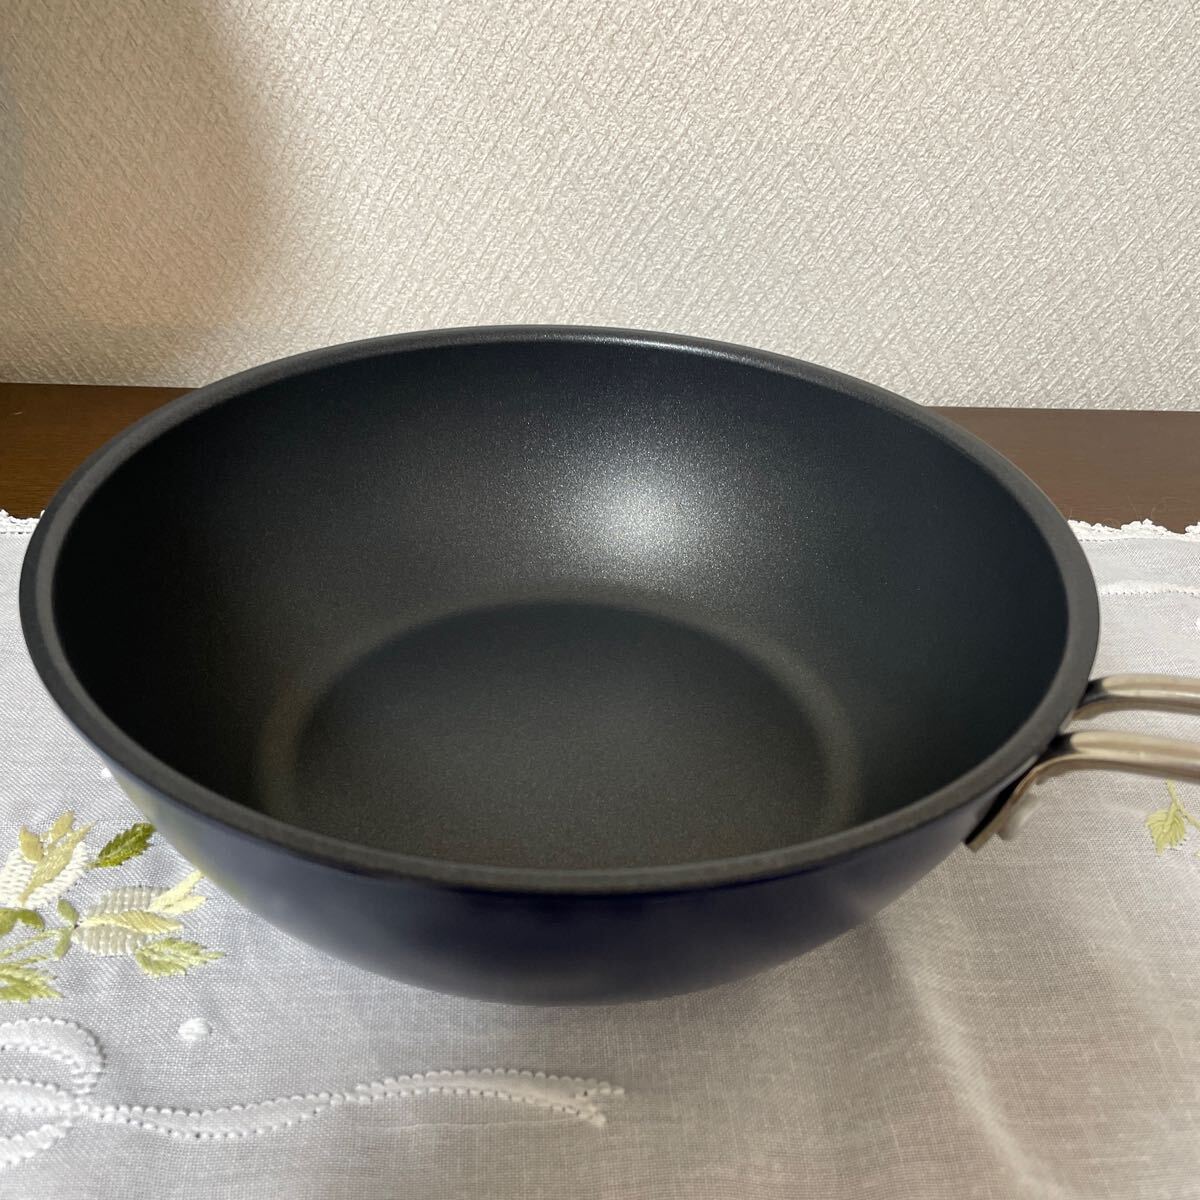  chestnut . is .. direct fire exclusive use deep fry pan 24cm cookware 